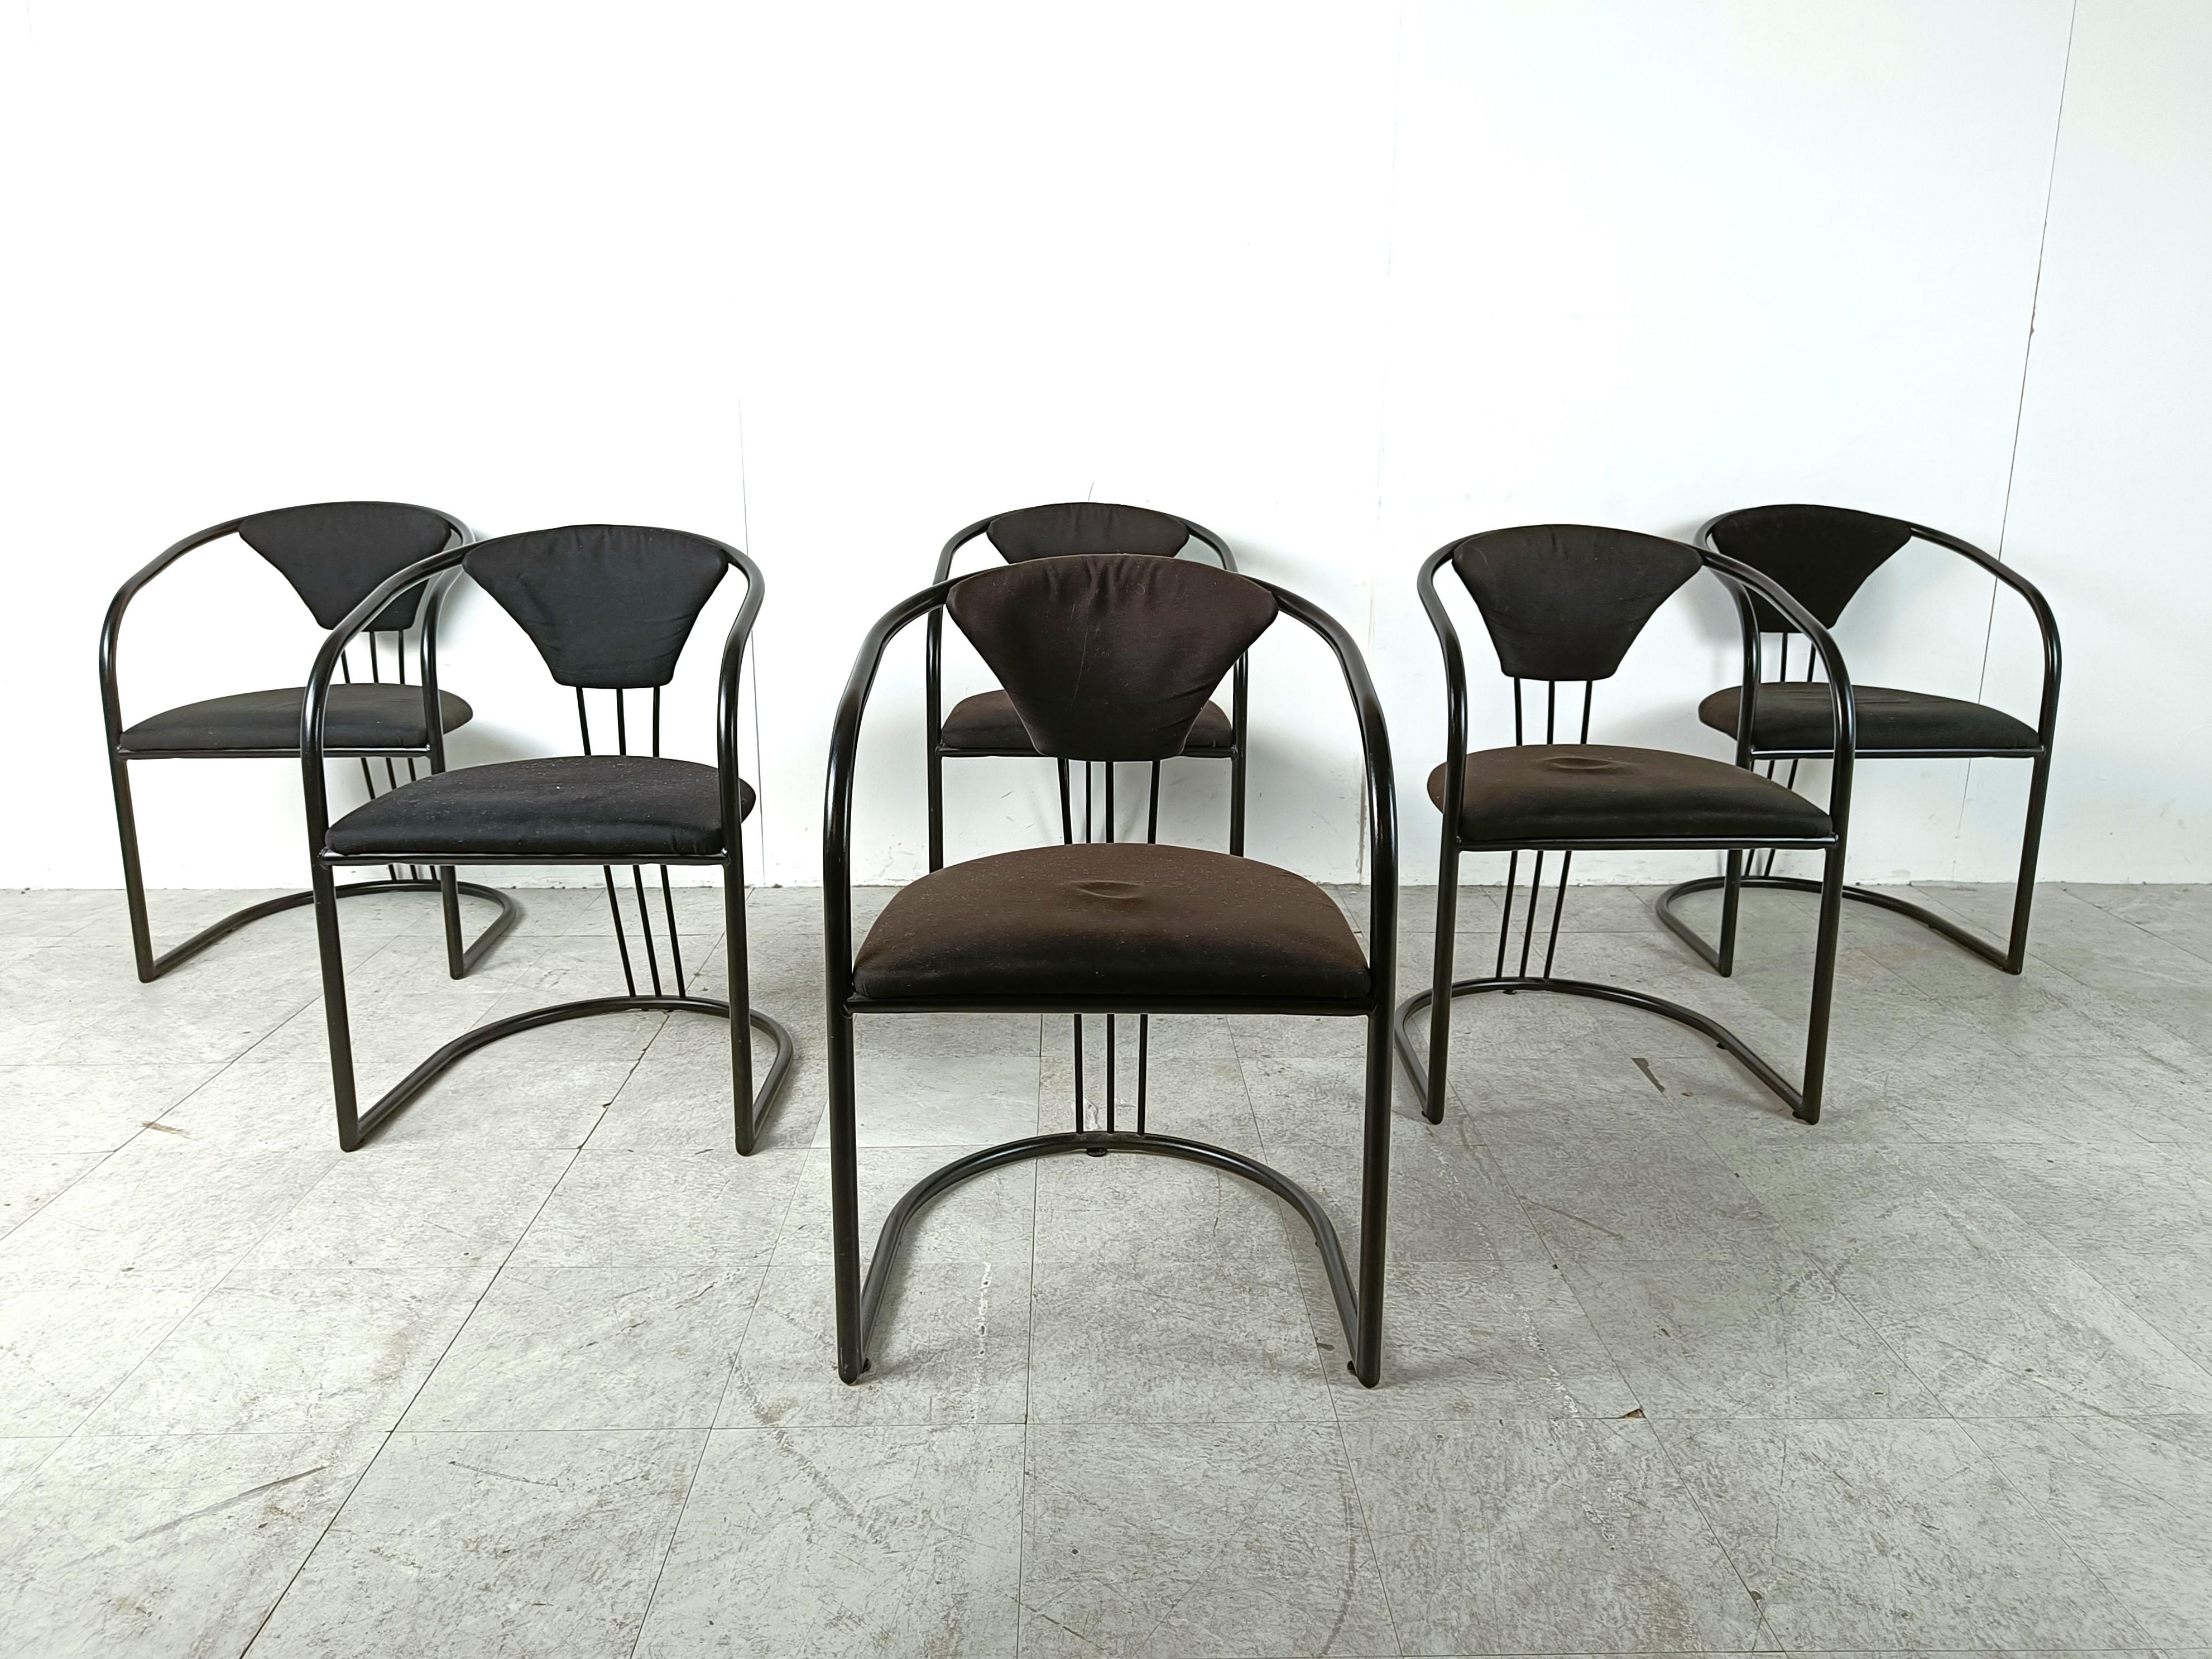 Post-Modern Italian Postmodern dining chairs, 1980s - set of 6 For Sale